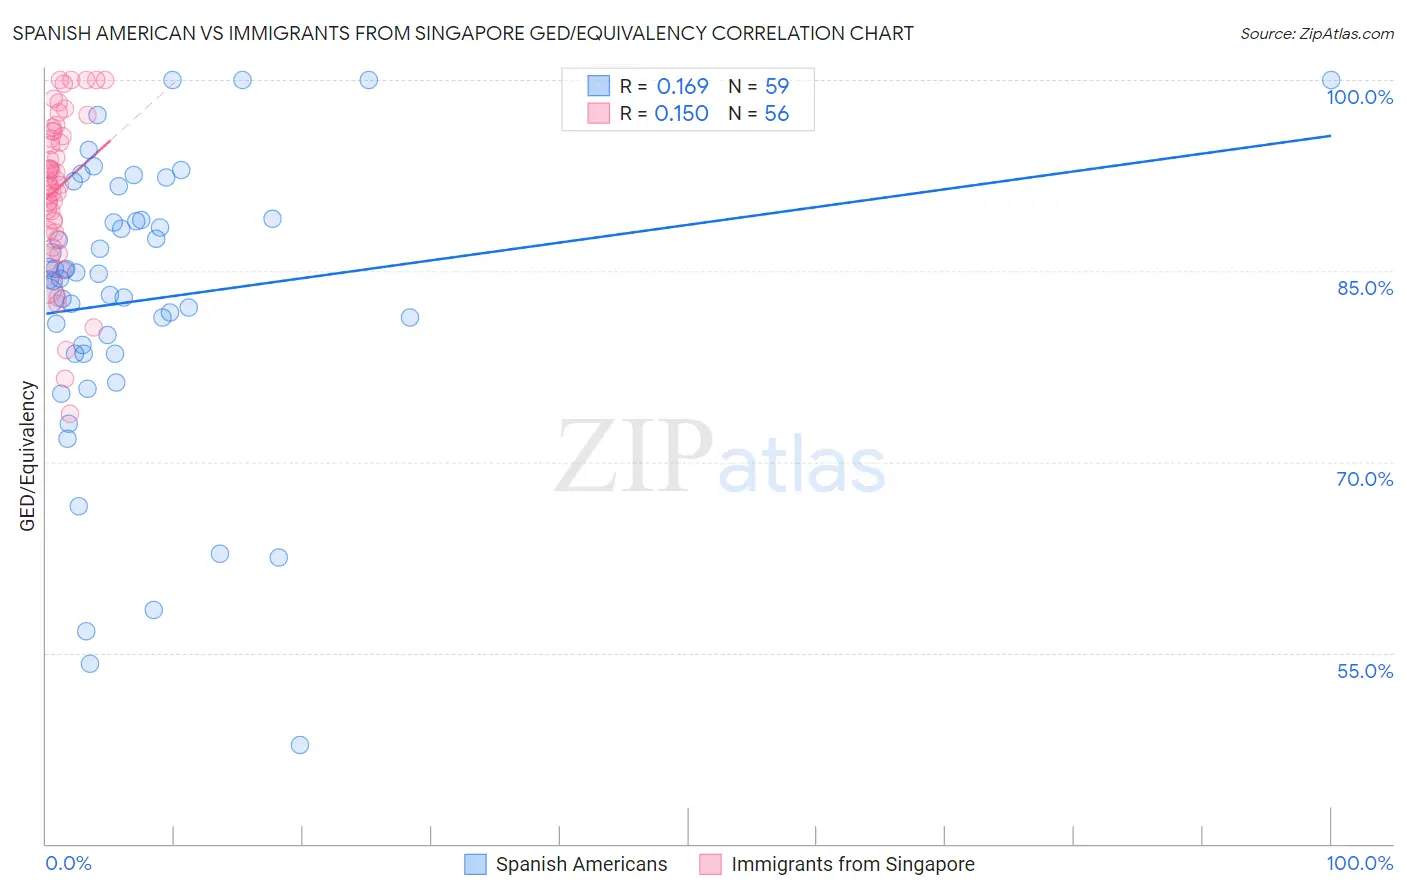 Spanish American vs Immigrants from Singapore GED/Equivalency